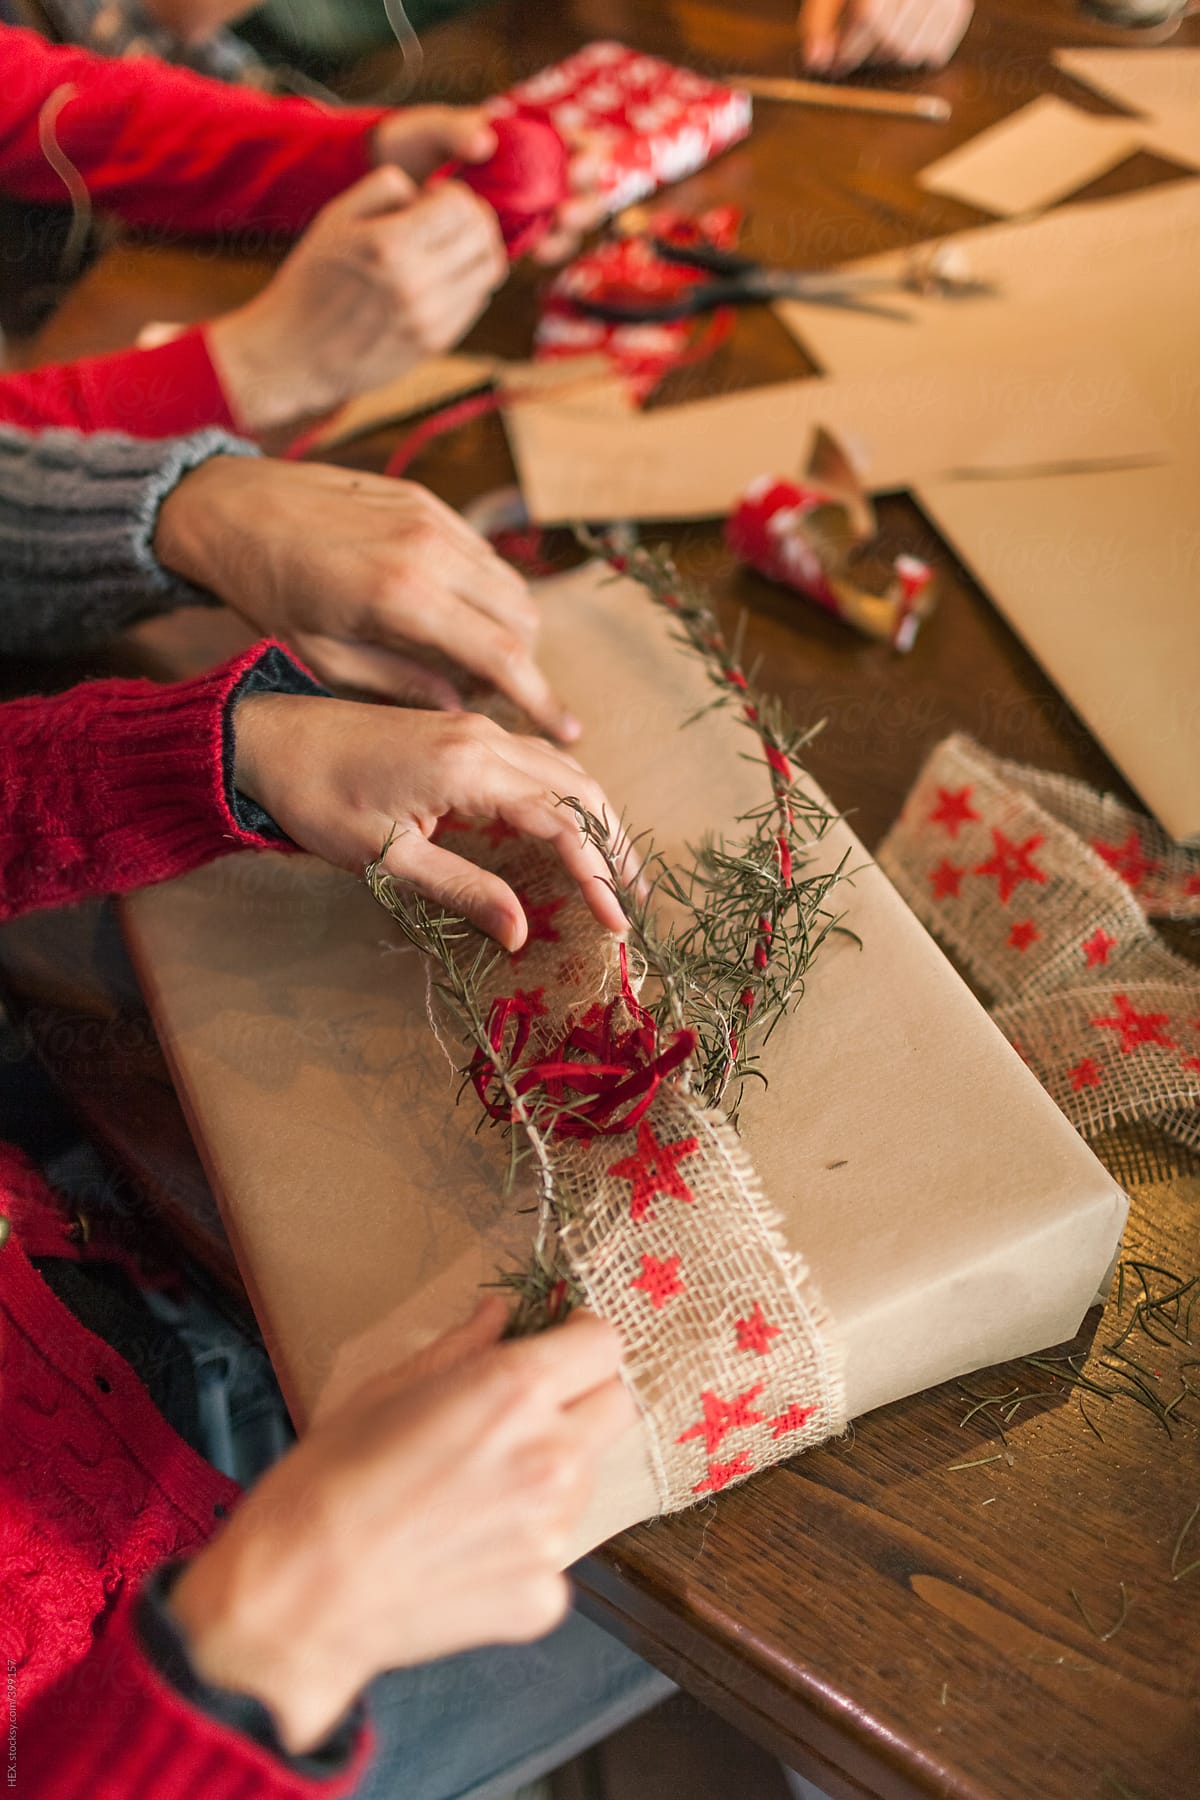 Friends Preparing Christmas Presents Over a Table